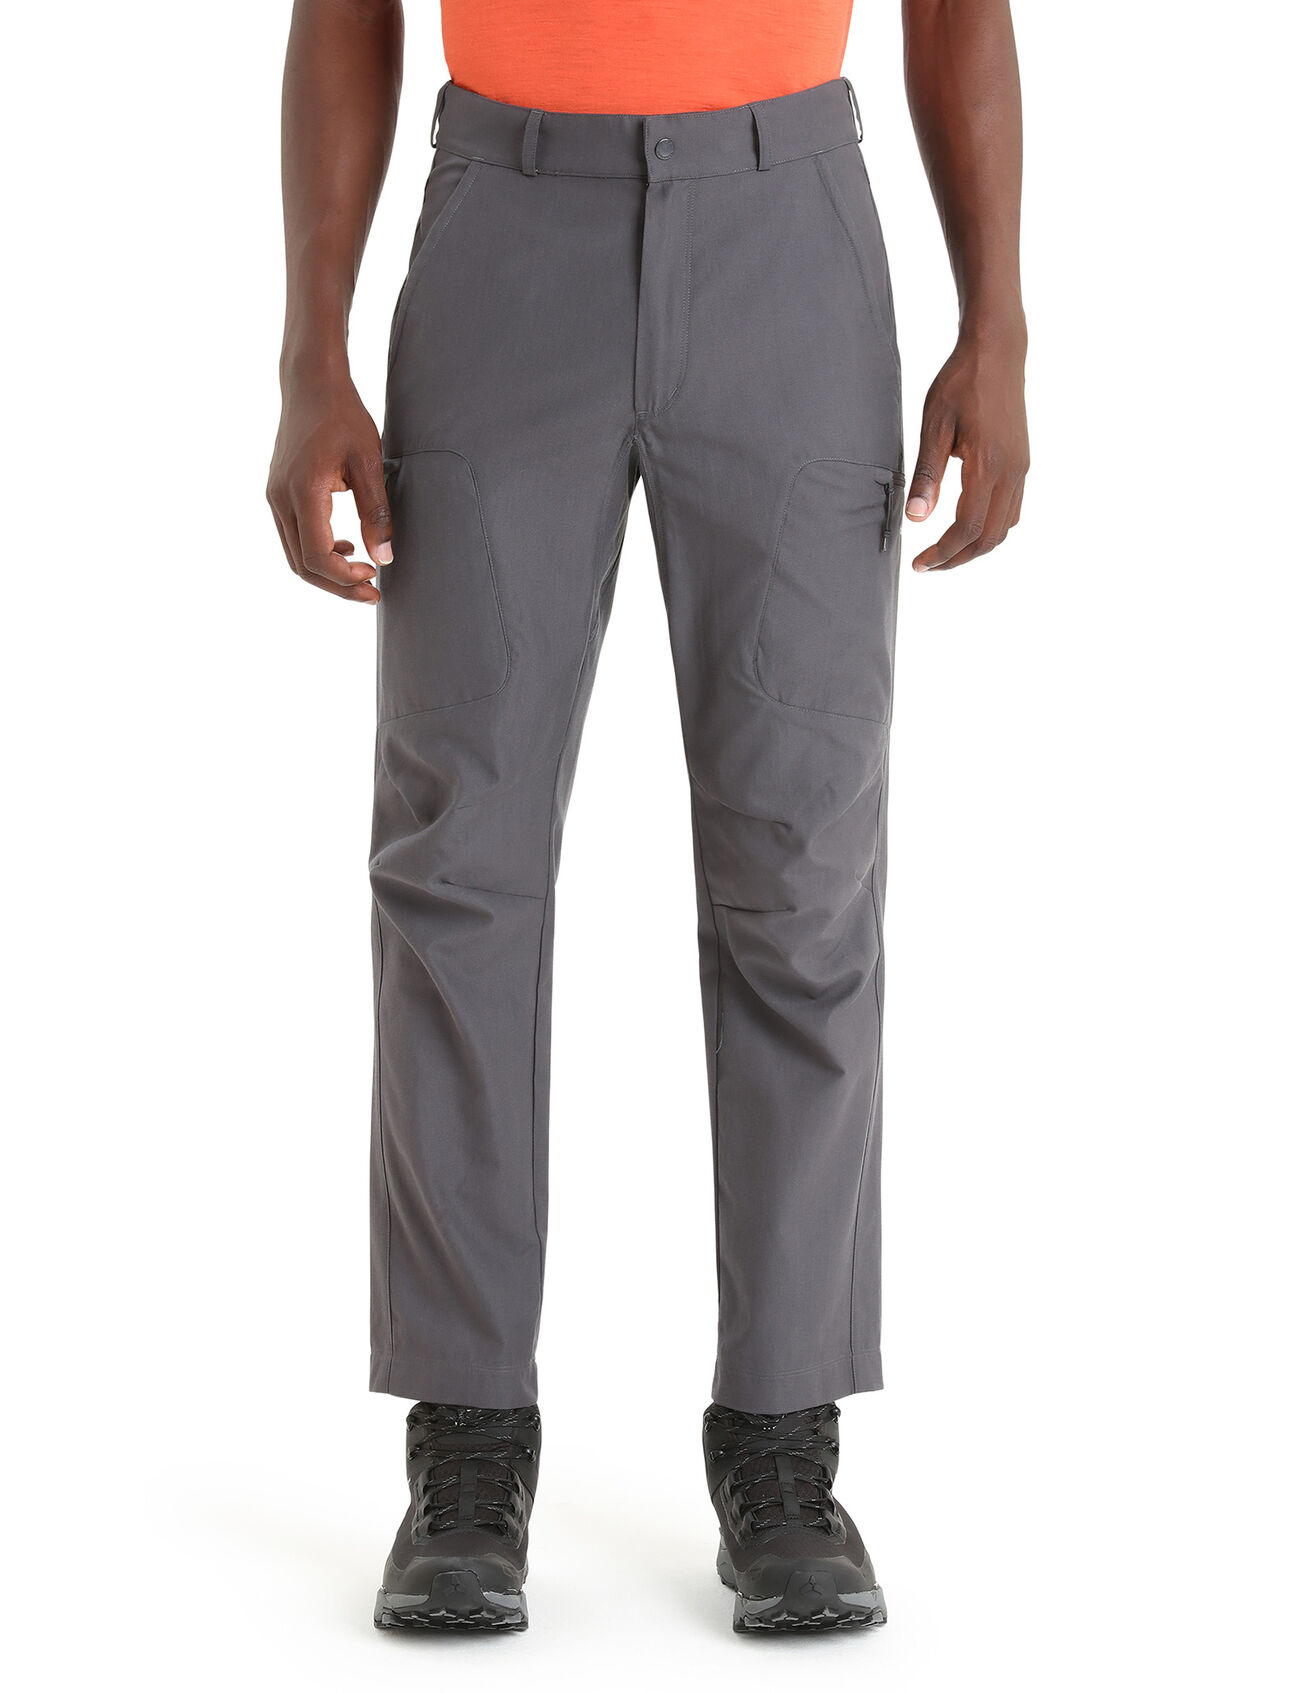 Mens Merino Hike Trousers A durable and dependable mountain pant made from a unique blend of merino wool and organic cotton, the Hike Pants are perfect for mountain adventures of all kinds.